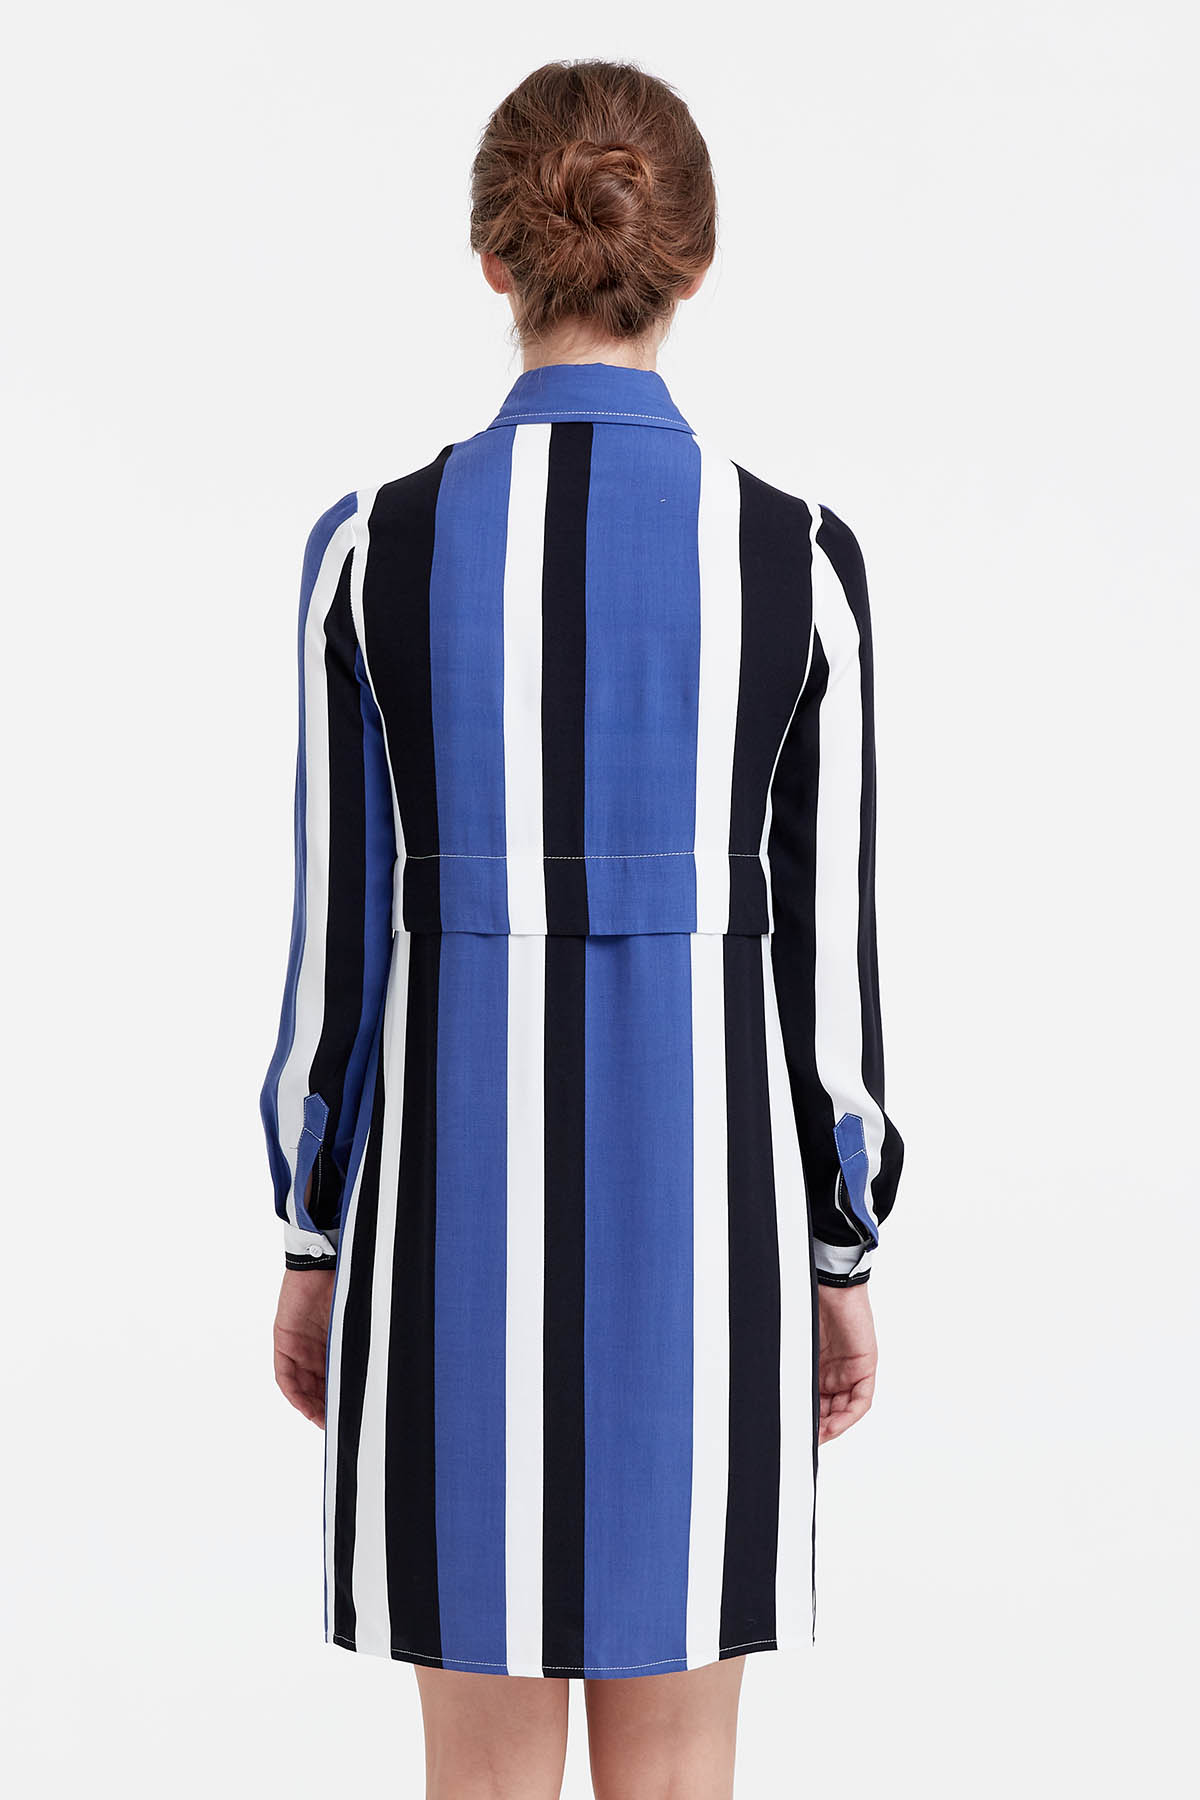 Shirt dress with black and blue stripes , photo 5